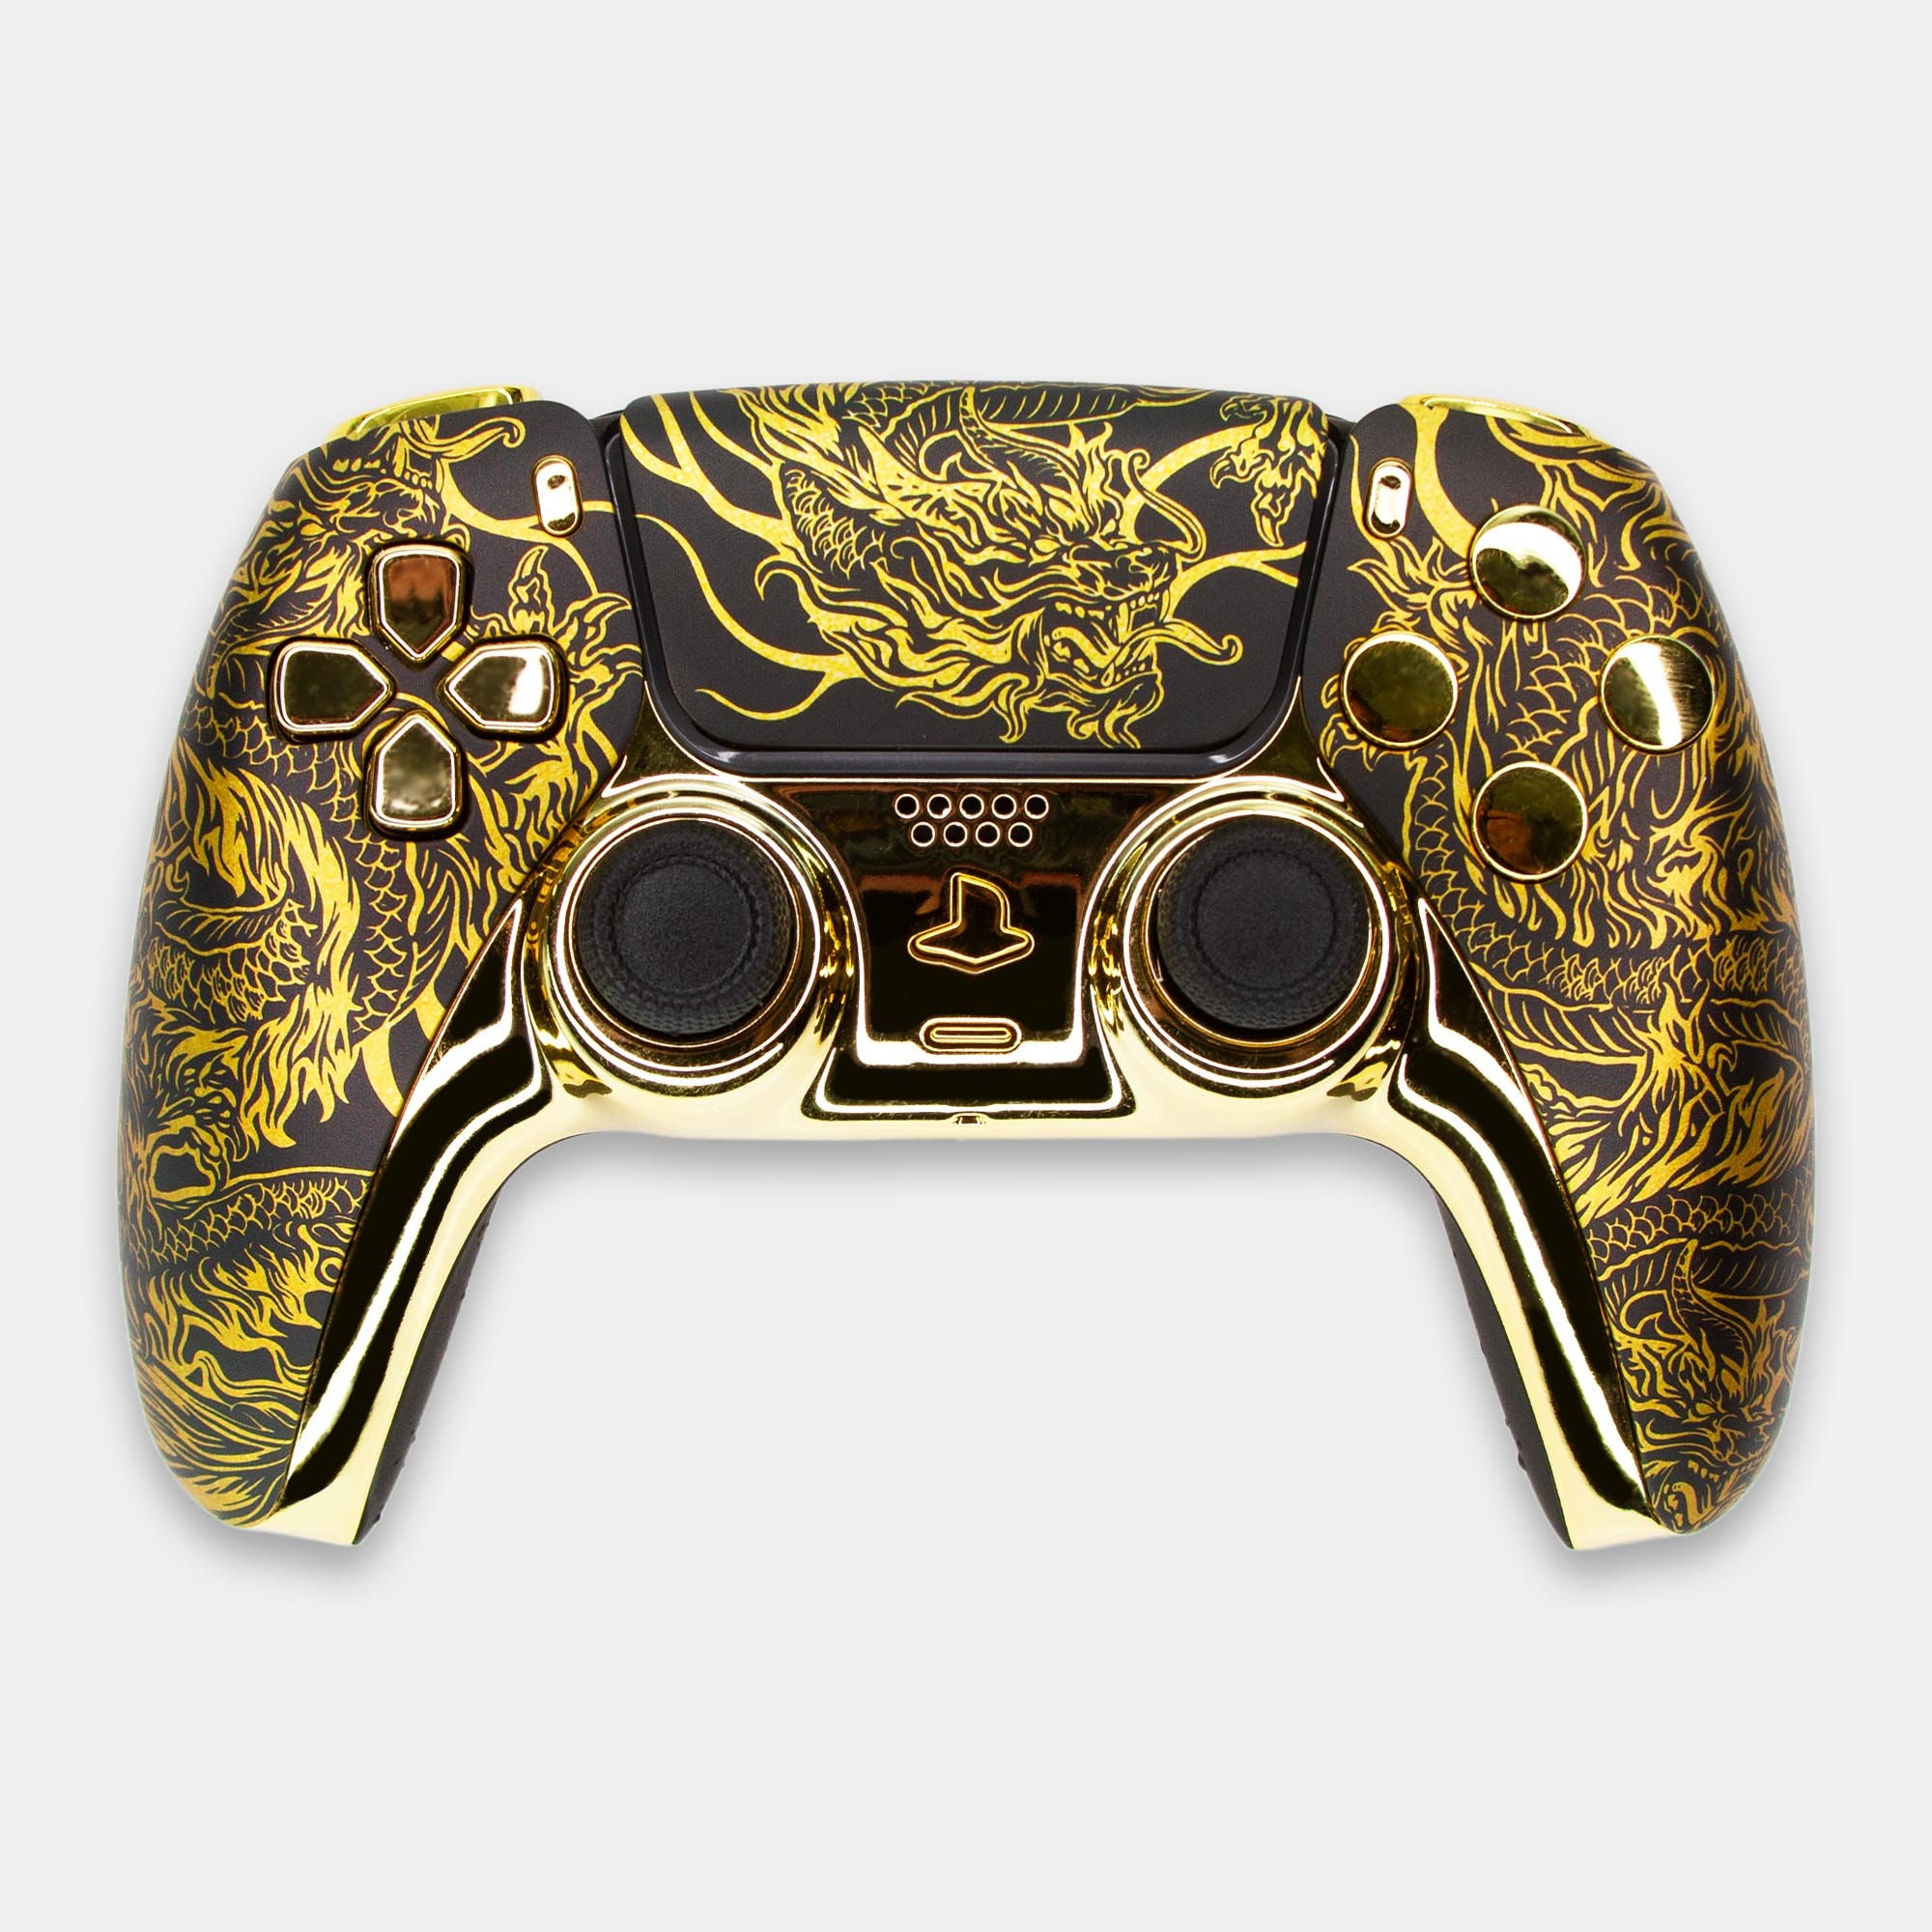 White/golden PS5 PRO Custom UN-MODDED Controller Exclusive 